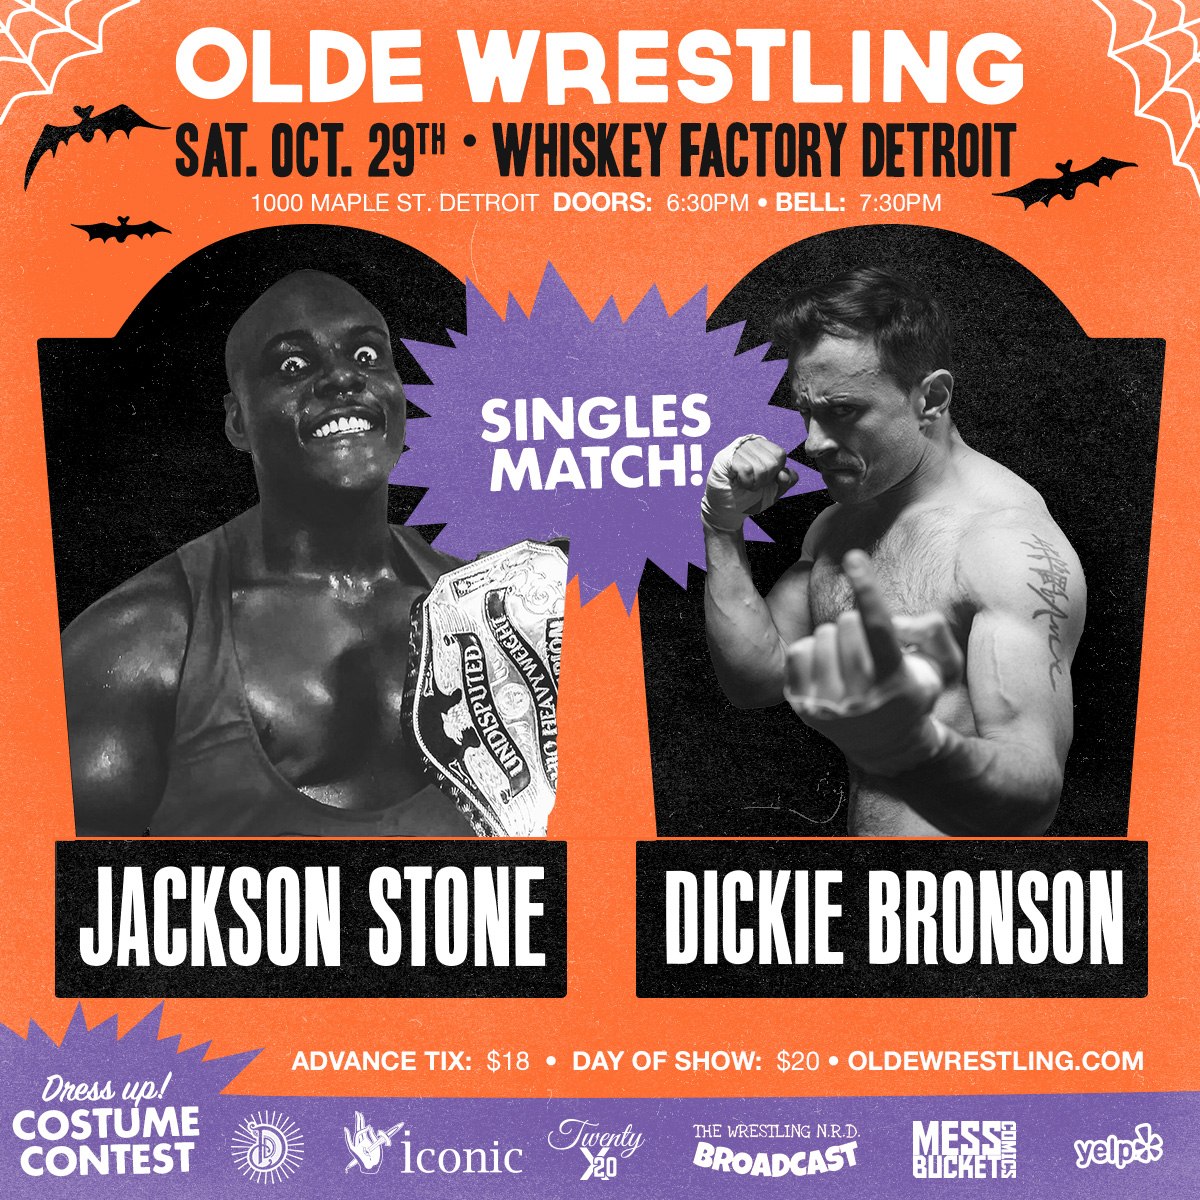 You may know the names, but on October 29th, you'll see @Jackson_Stone31 and @BronsonKills like you've never seen them before! Witness the battle of two established names from Detroit at the Whiskey Factory!

Tickets just $18 in advance. oldewrestling.com/detroit